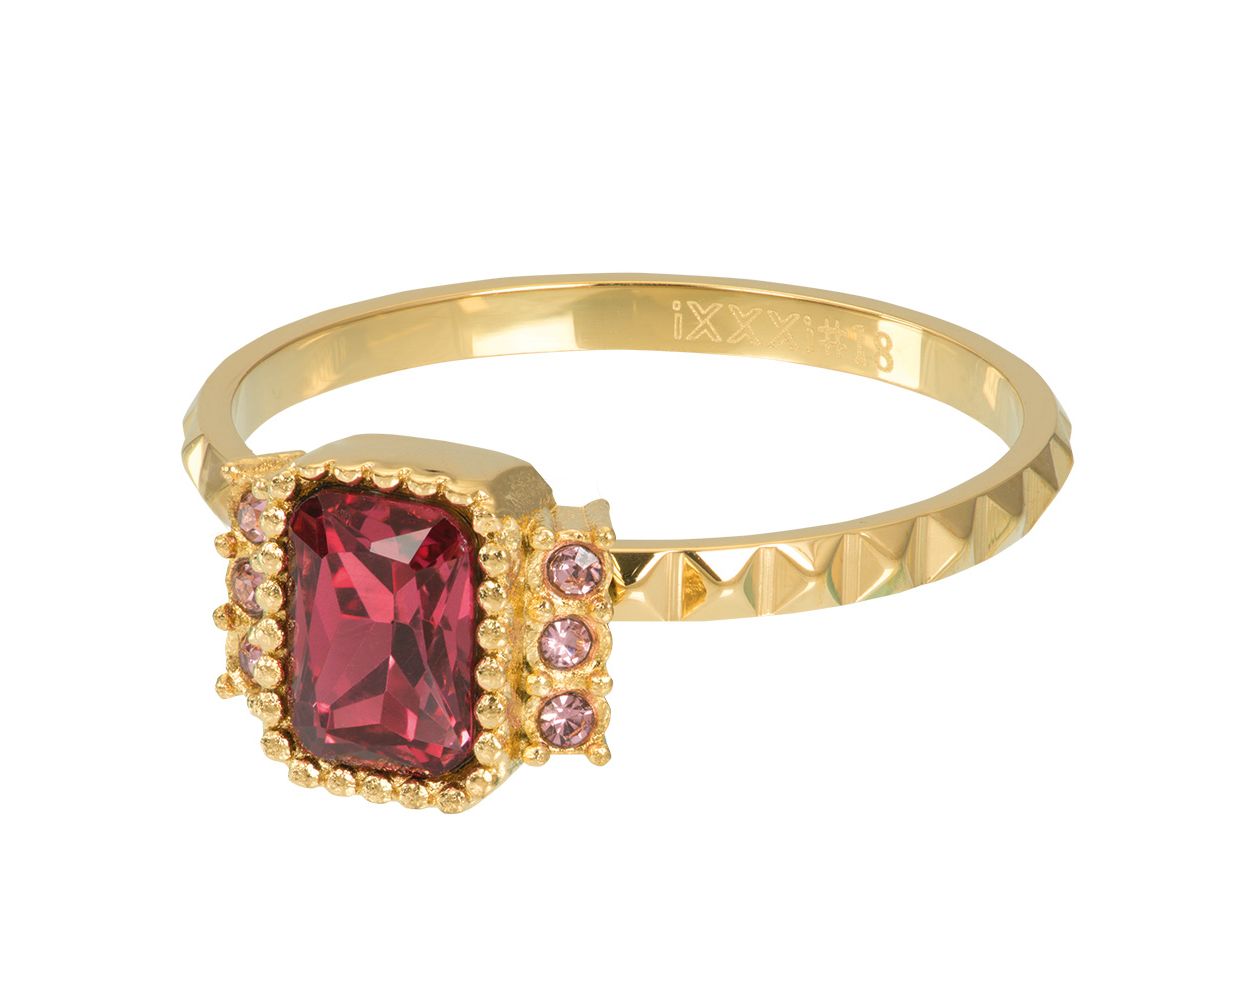 iXXXi Ring Miracle Pink - R06648